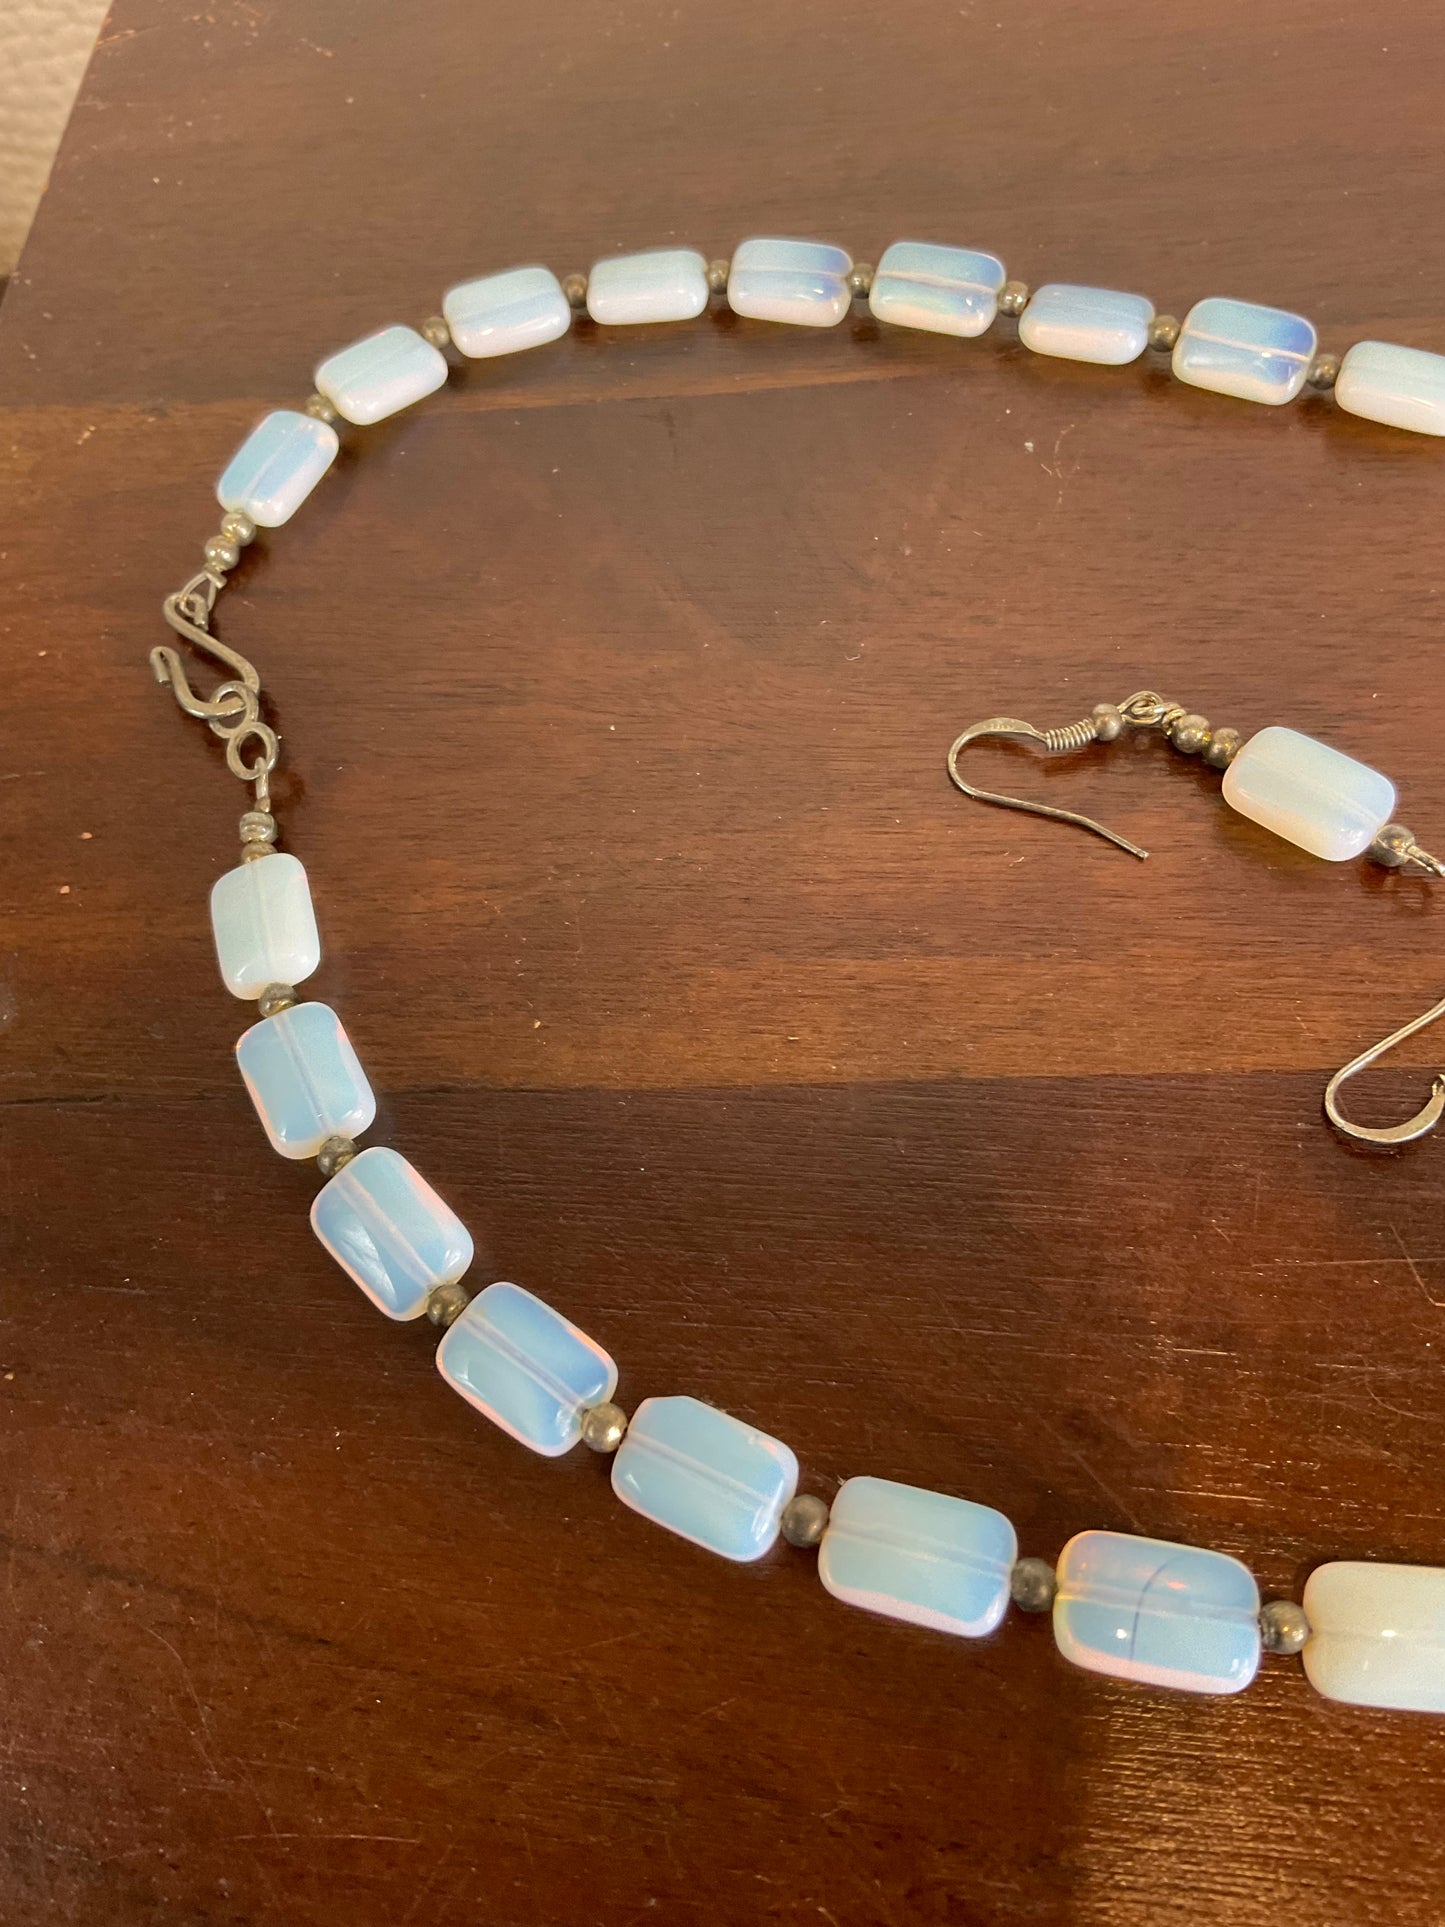 Beaded Necklace with Earrings